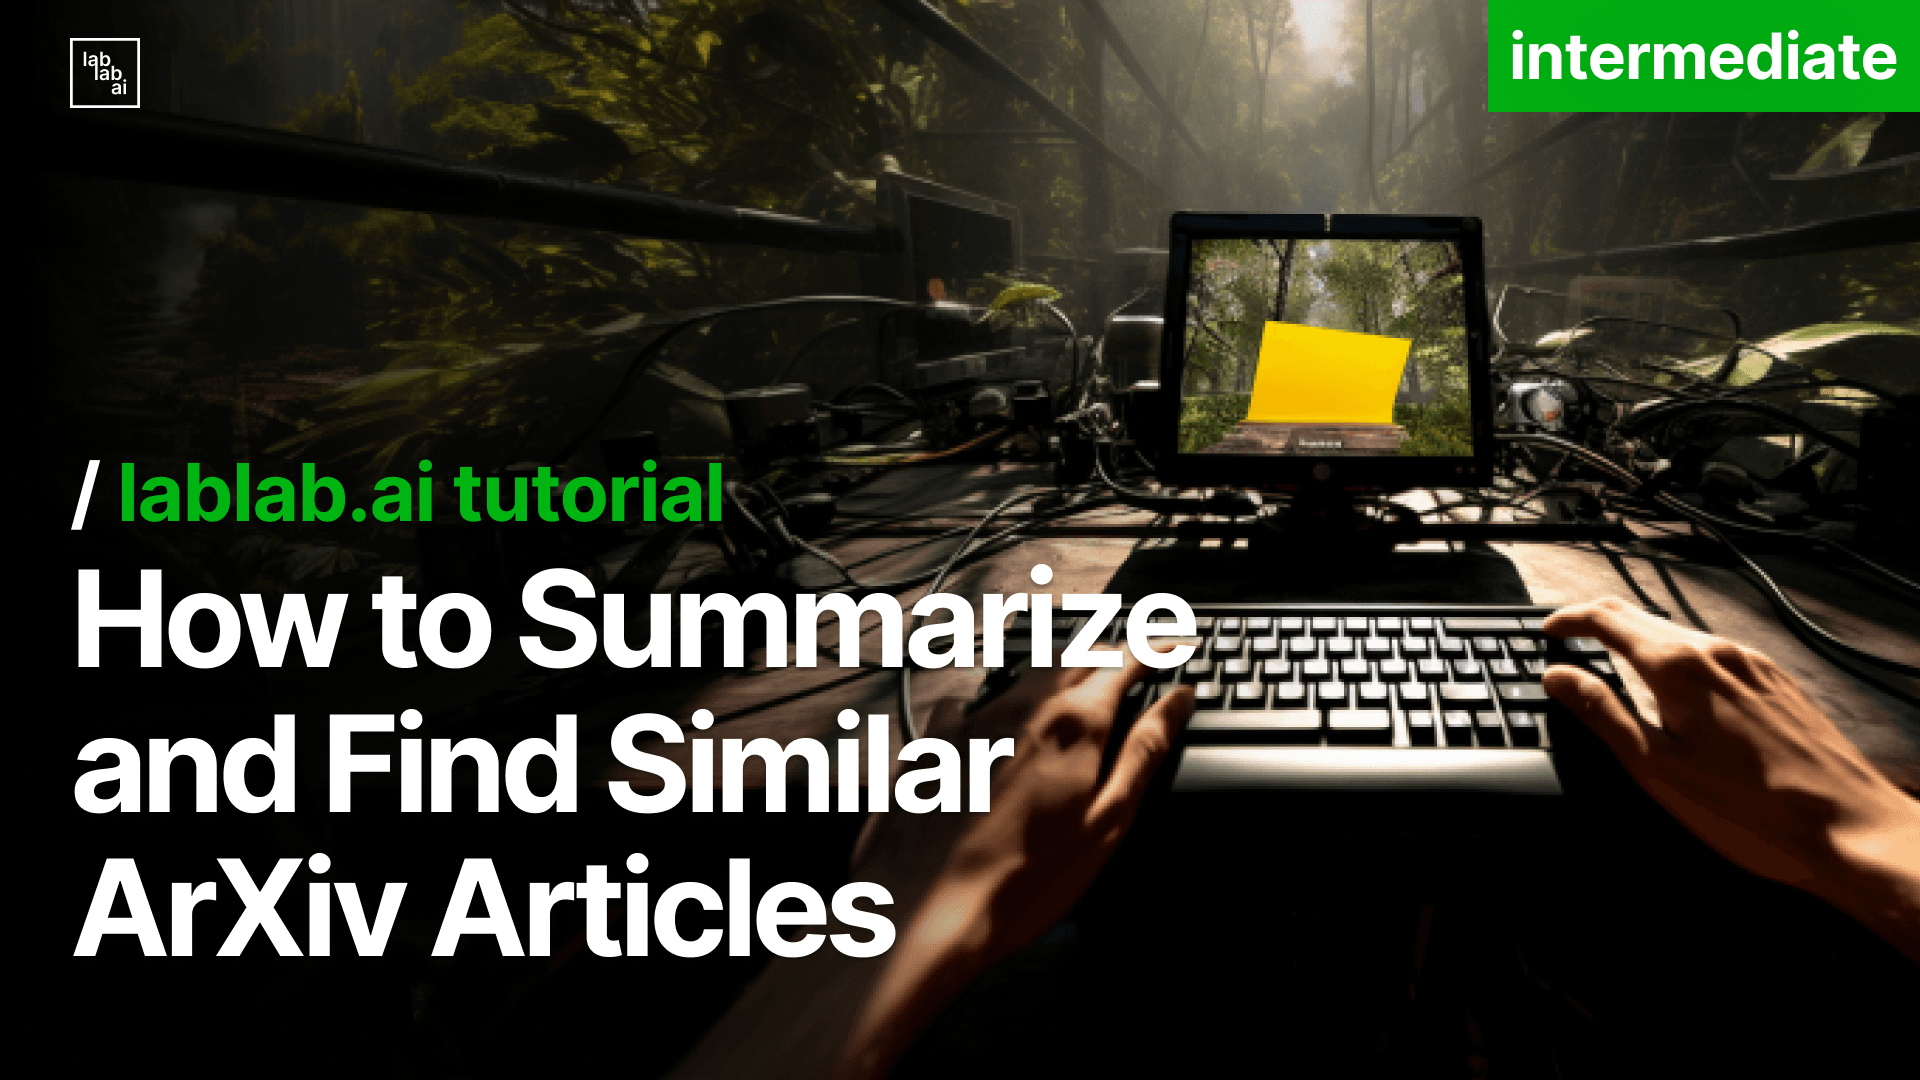 How to Summarize and Find Similar ArXiv Articles